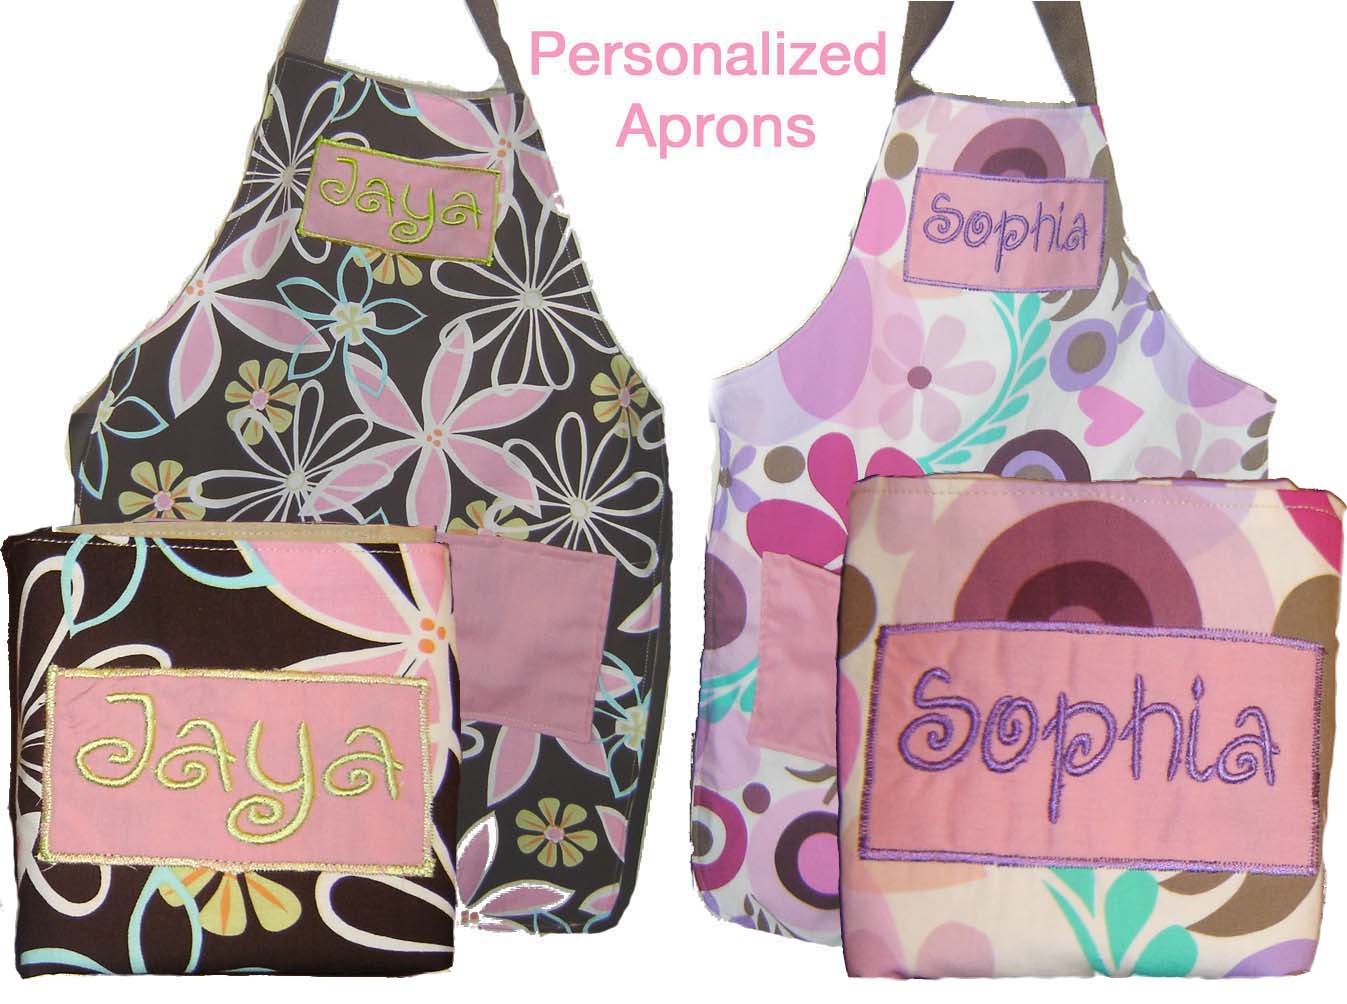 [Personalized+Aprons.jpg]